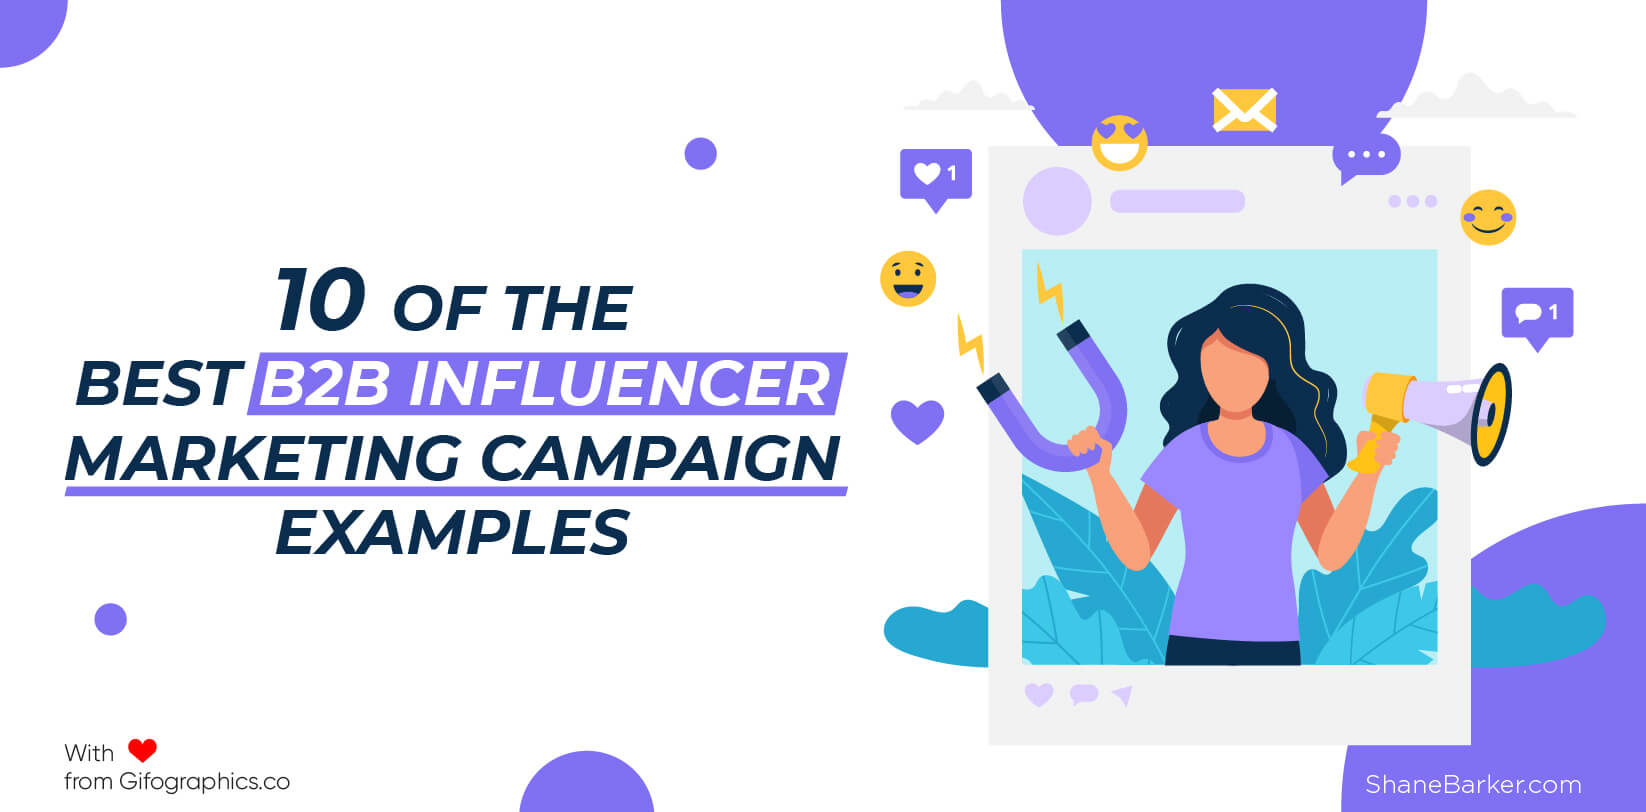 10 of the best b2b influencer marketing campaign examples